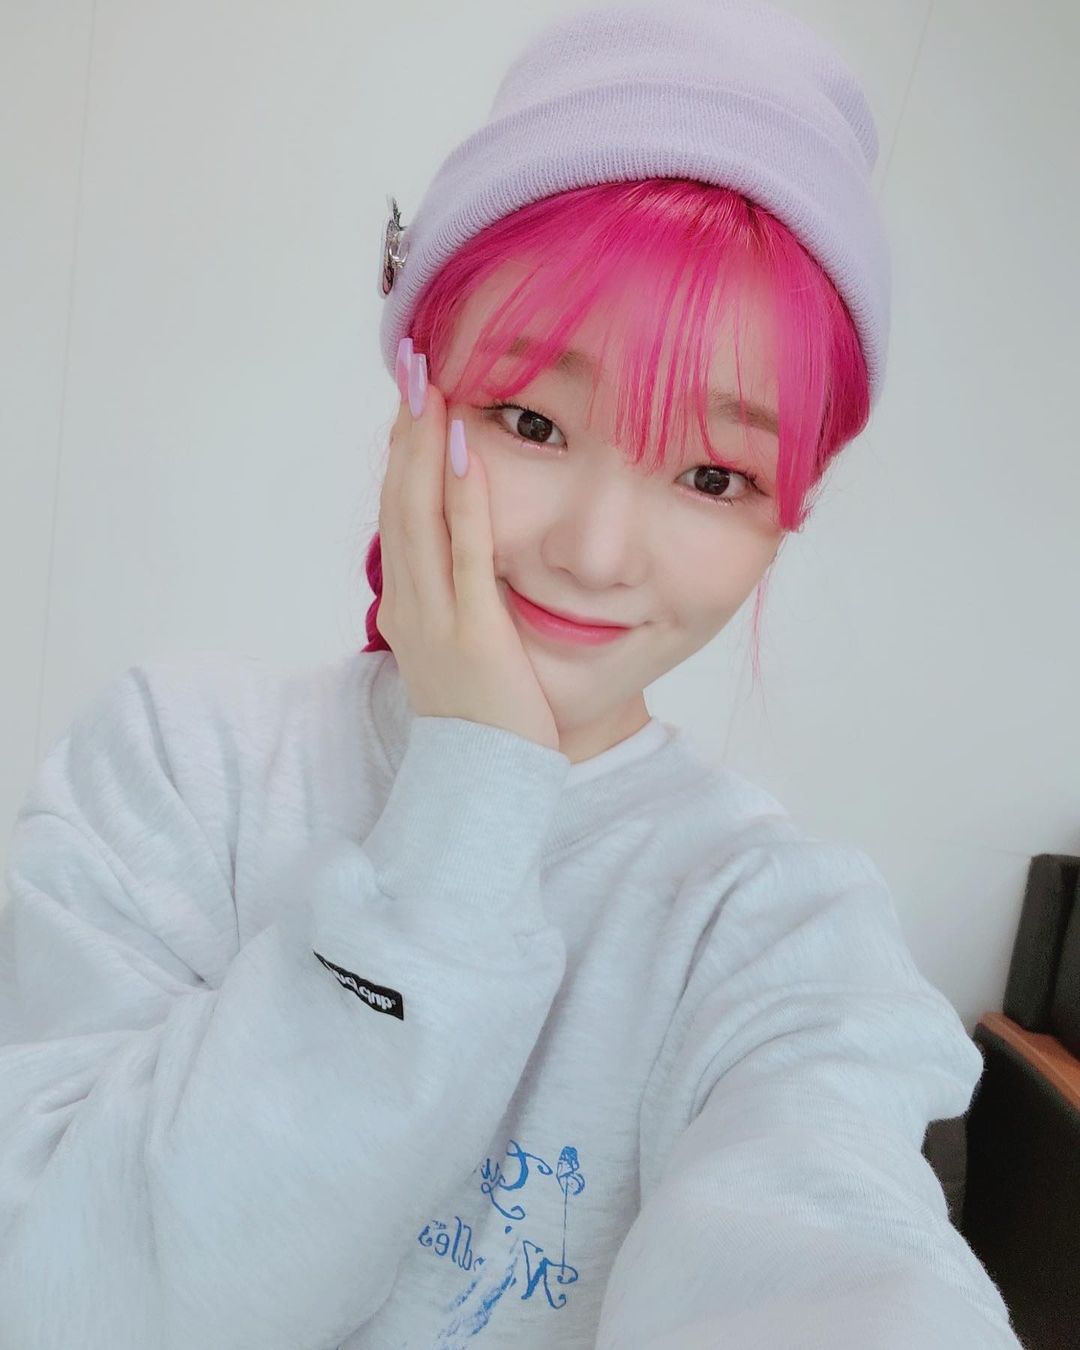 OH MY GIRL Seung Hee, hot pink hair is also perfect... Refreshing explosion